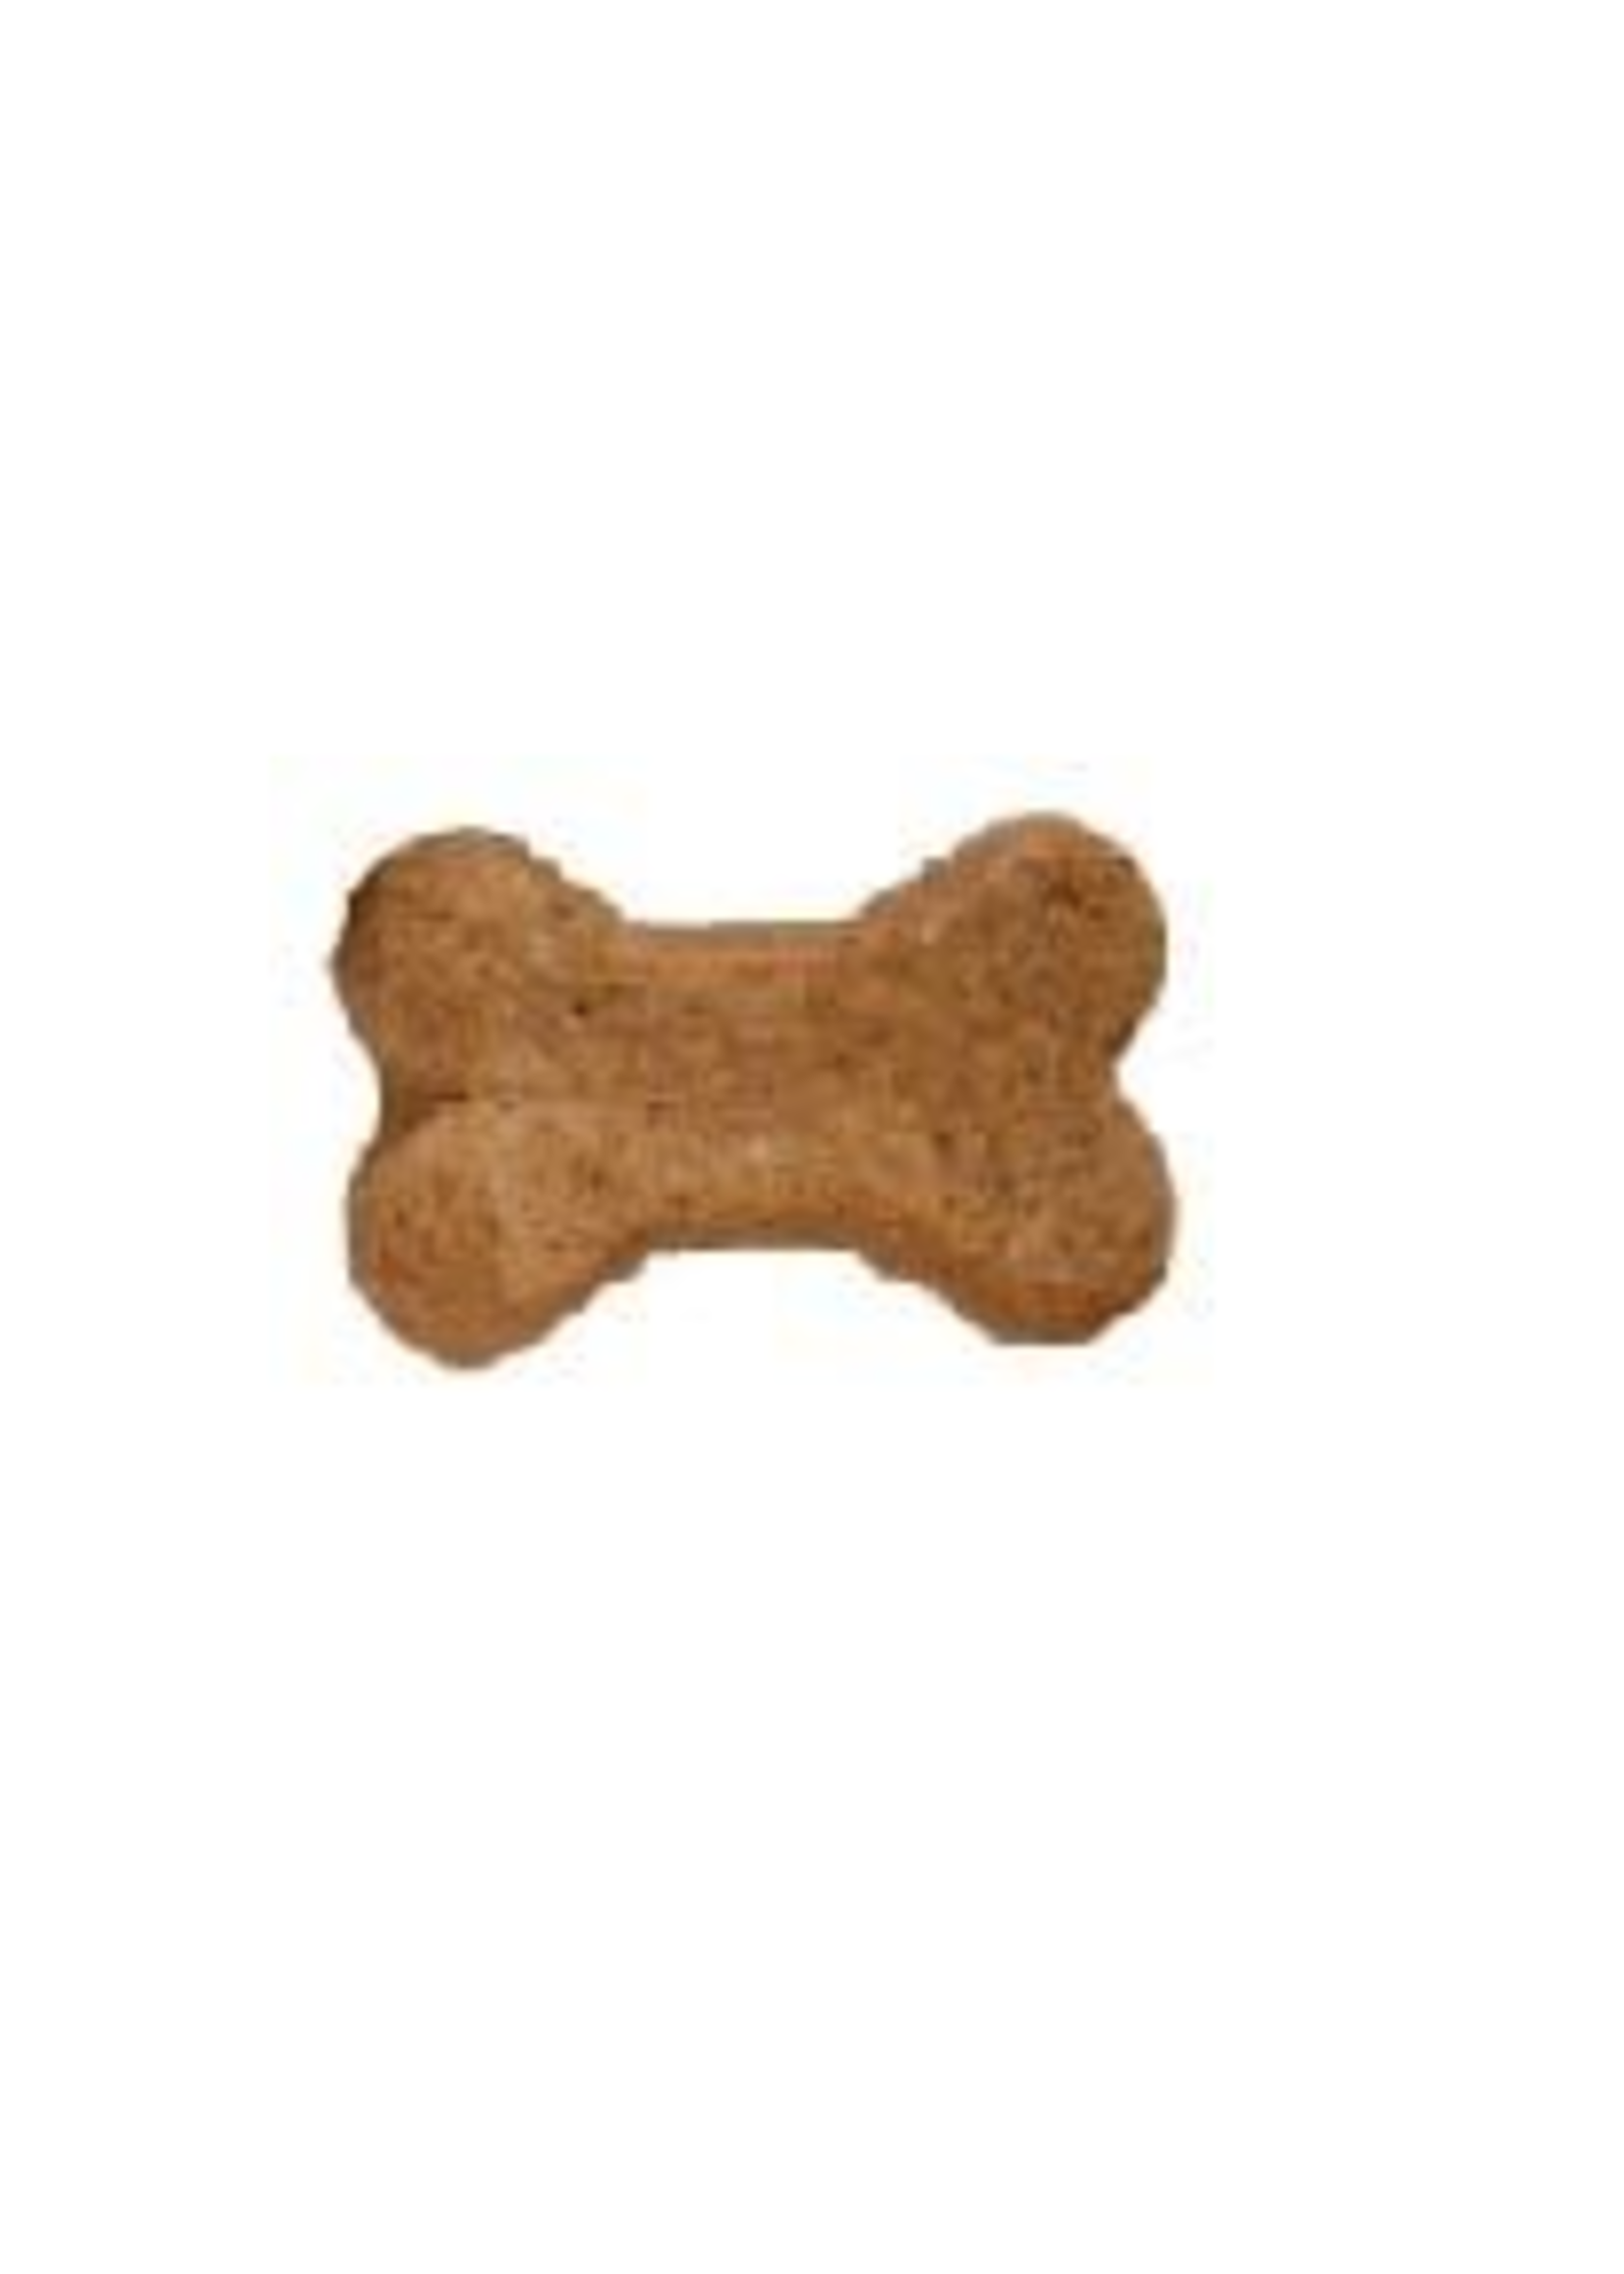 Oven Baked Tradition™ Treat Time Puppy (mini) Biscuits Golden 20lb Box